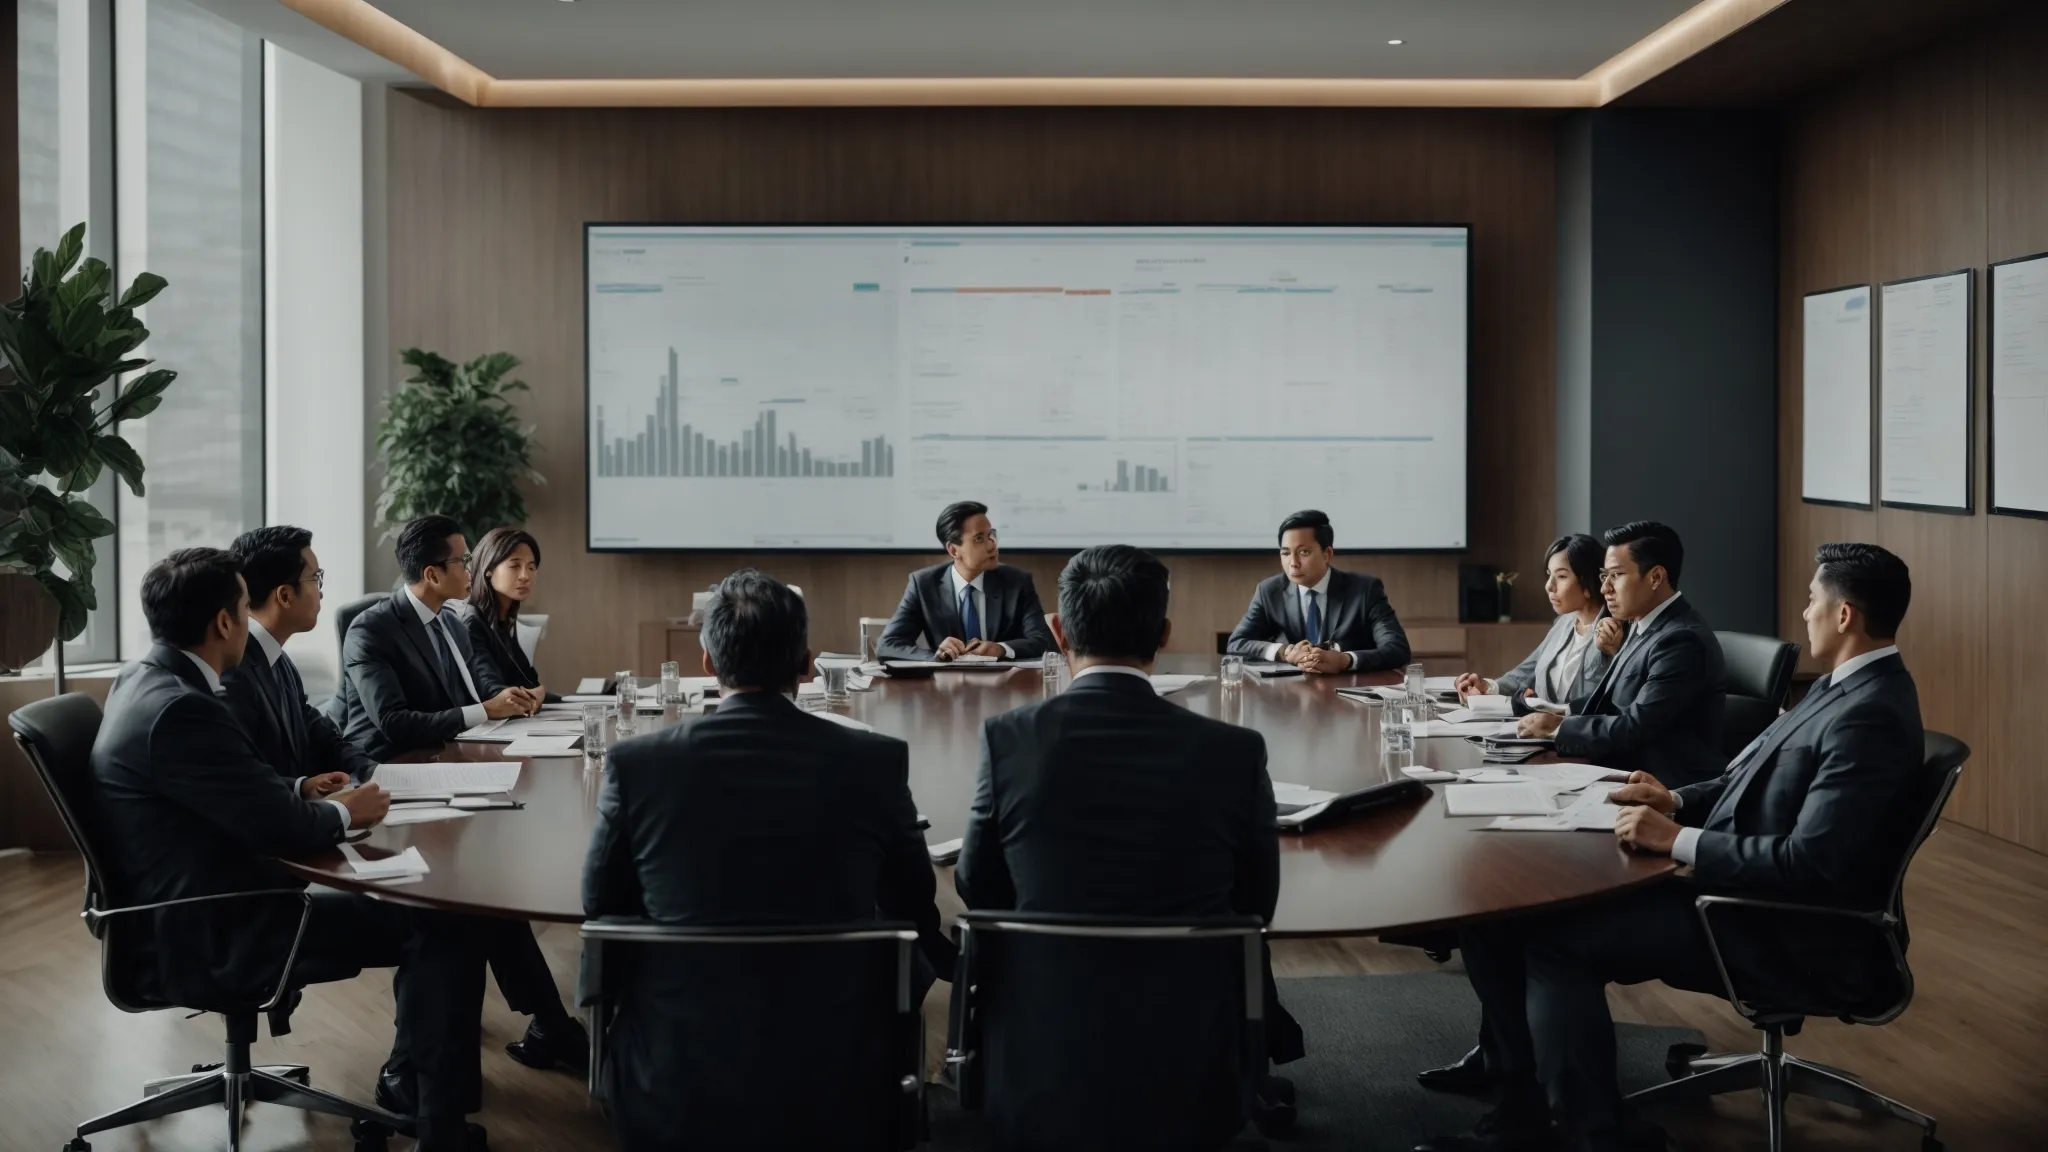 a group of serious investors congregates in a corporate meeting room, poring over legal documents and charts indicating changing regulations in a global context.